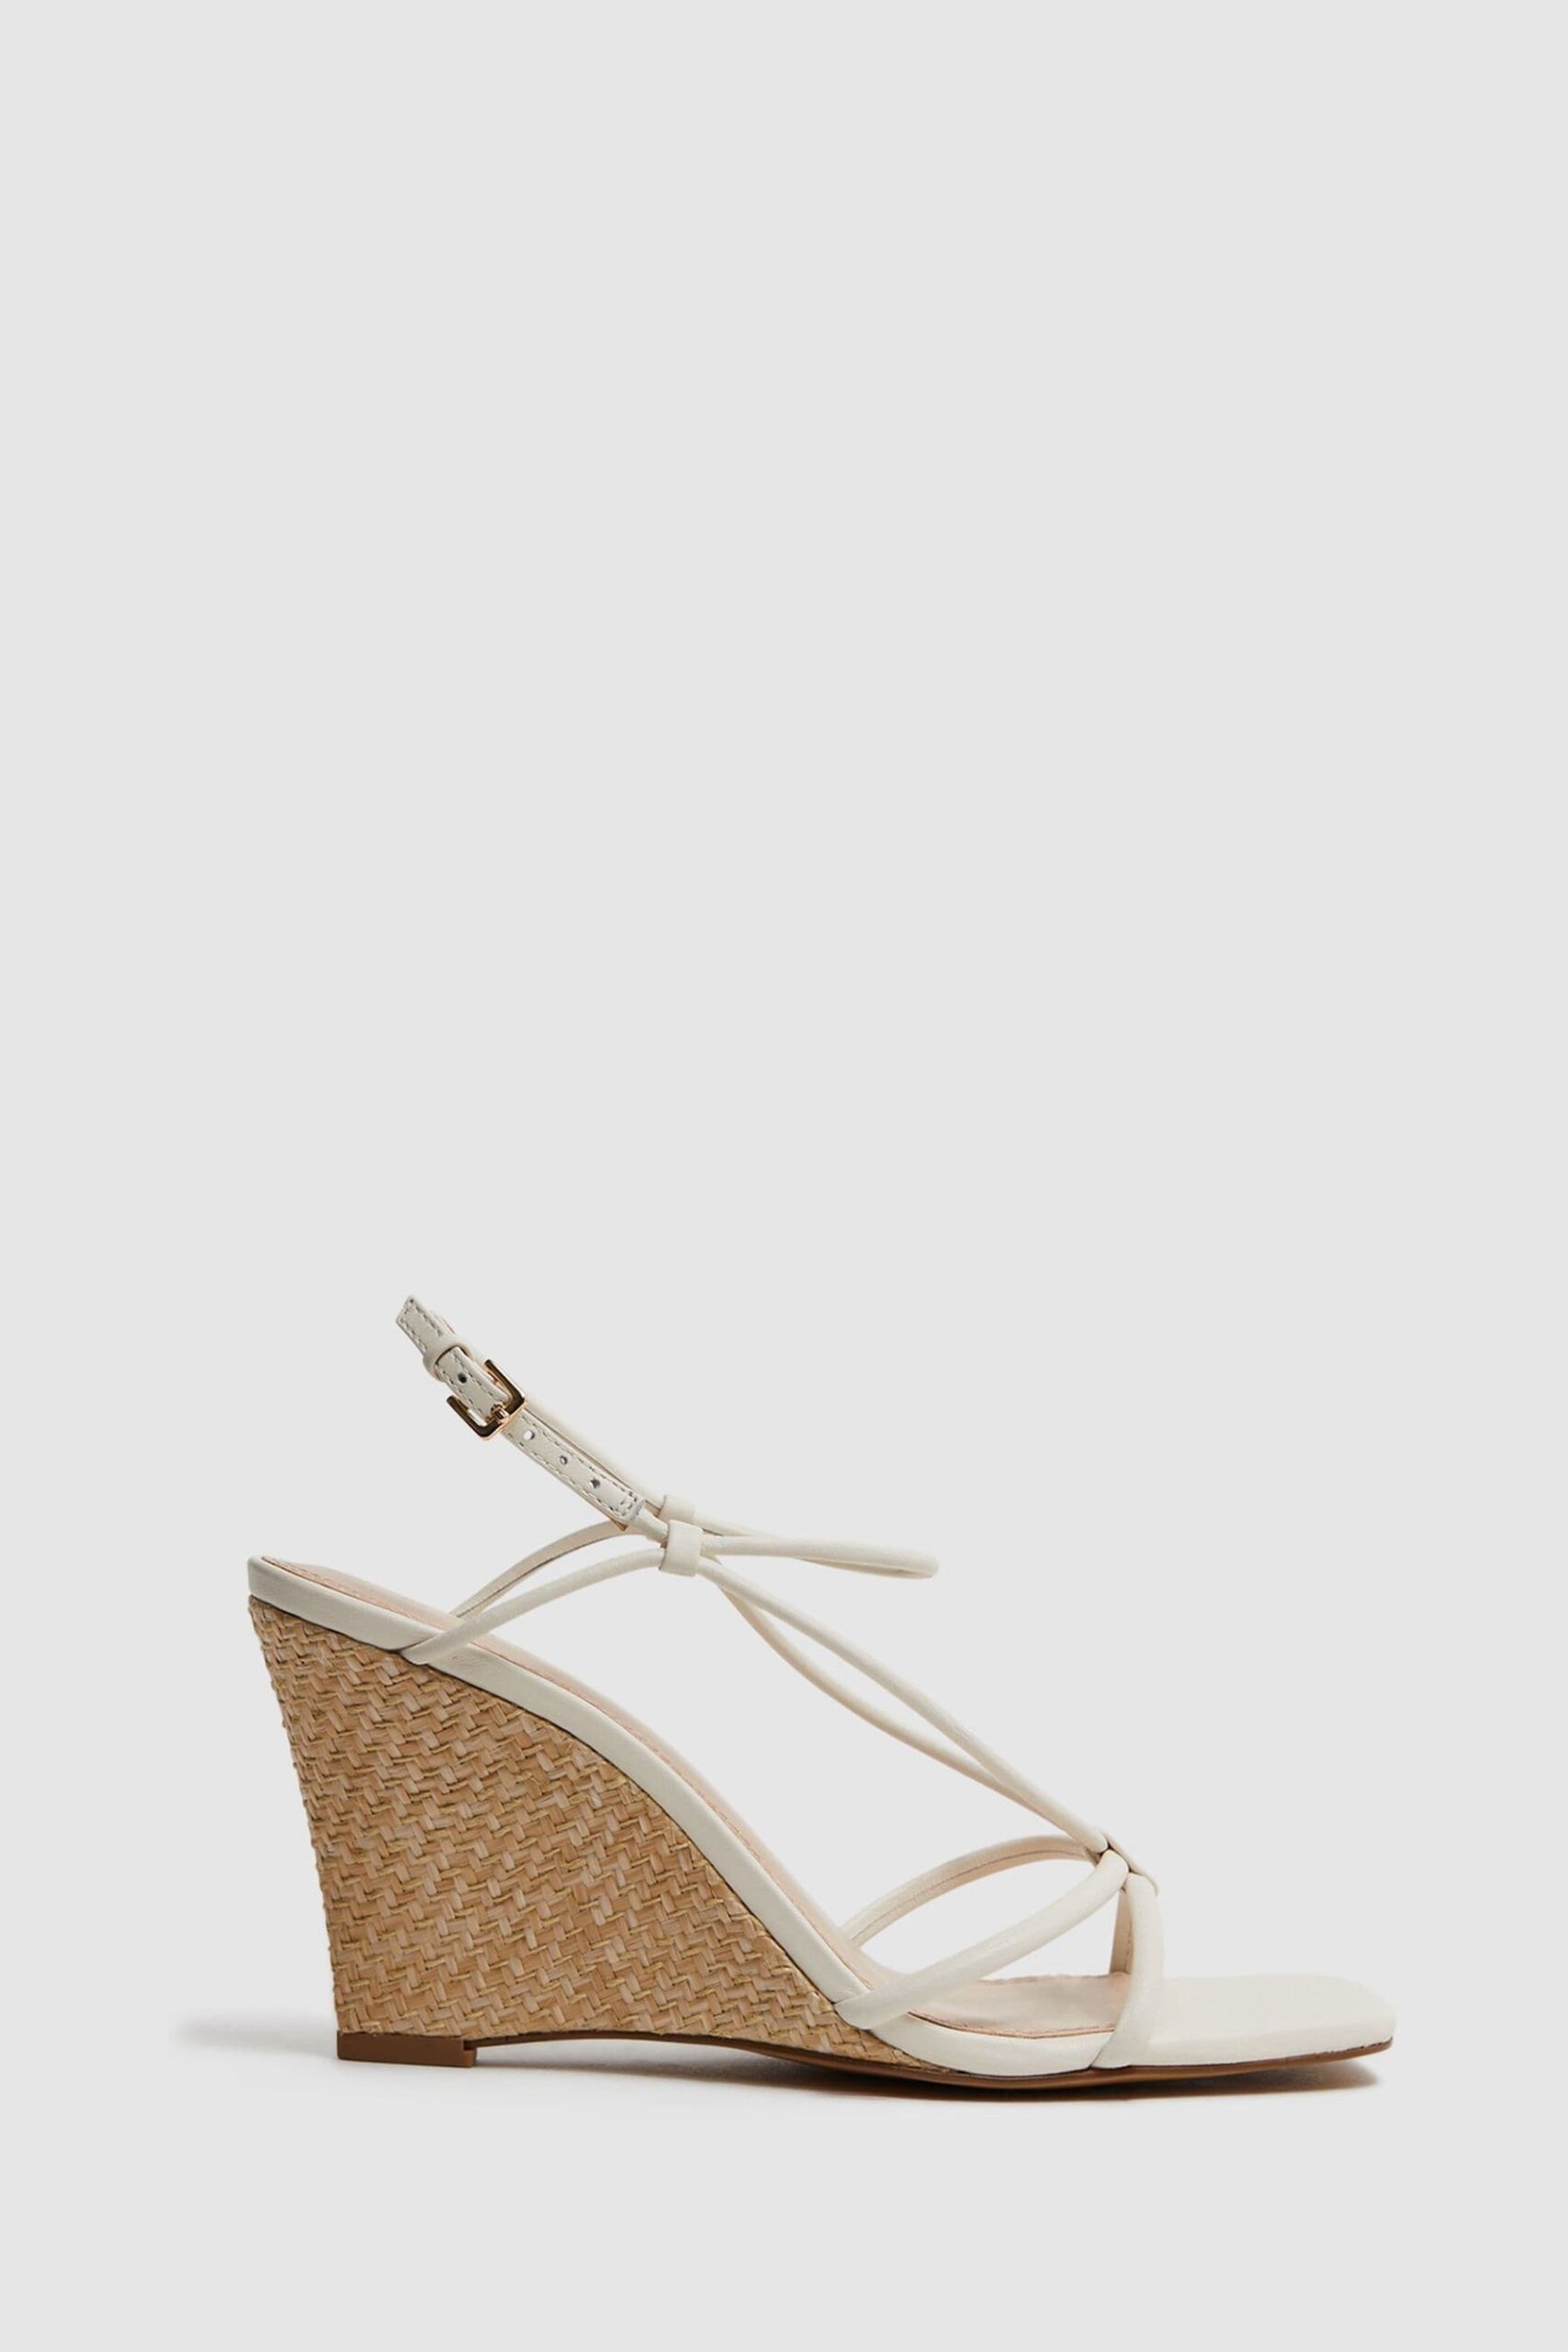 Daisey Strappy Wedge Heels - White Leather Plain